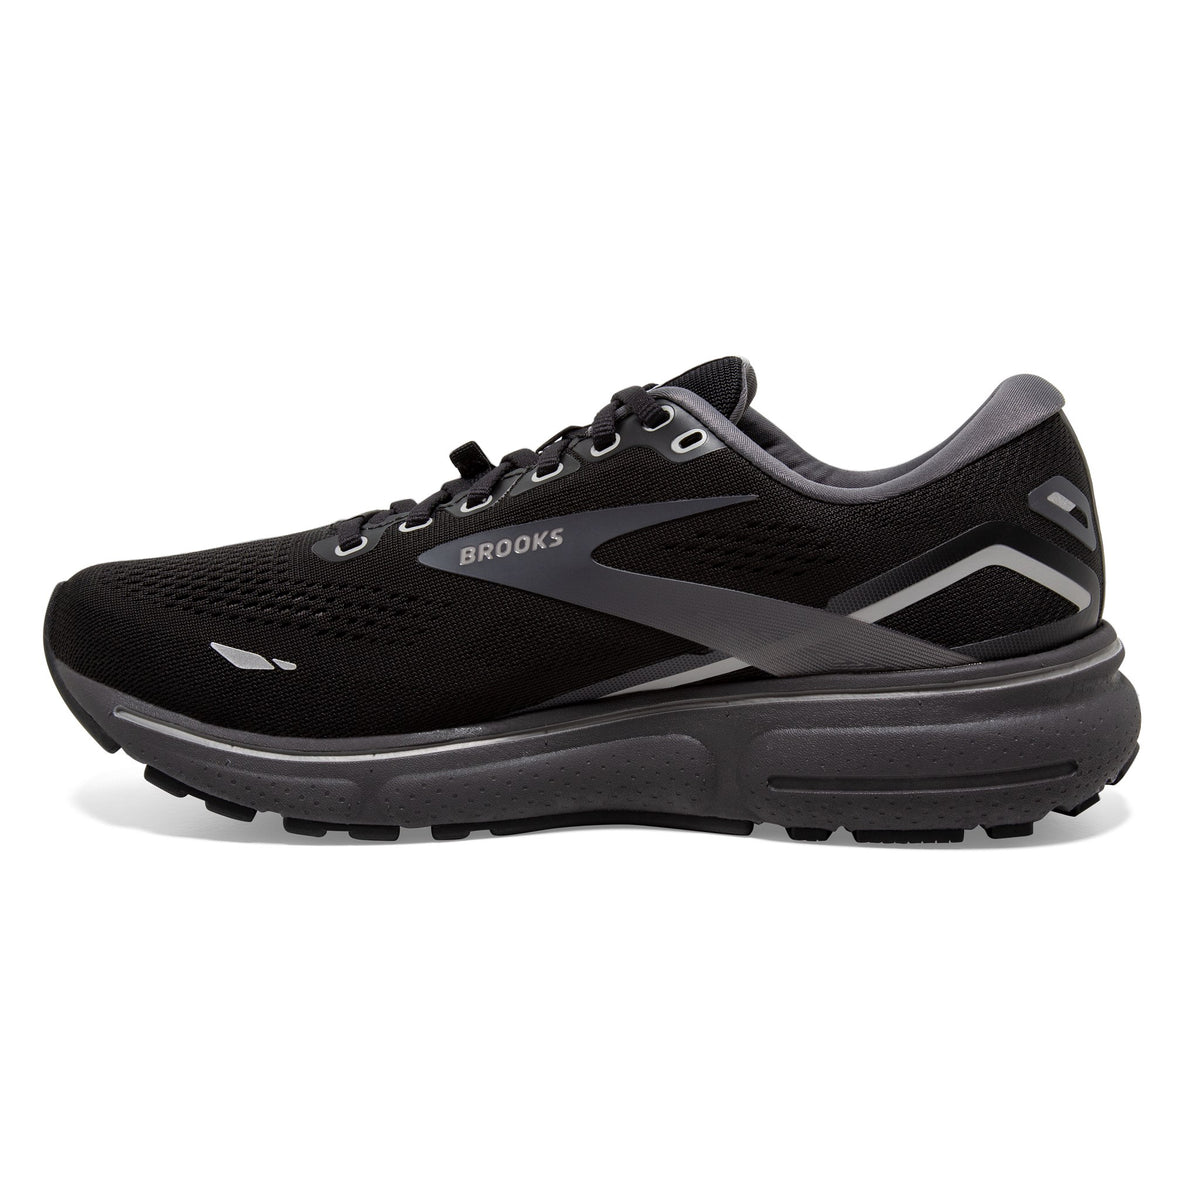 Brooks Ghost 15 GTX Womens Trail Shoes: Black/Blackened Pearl/Alloy